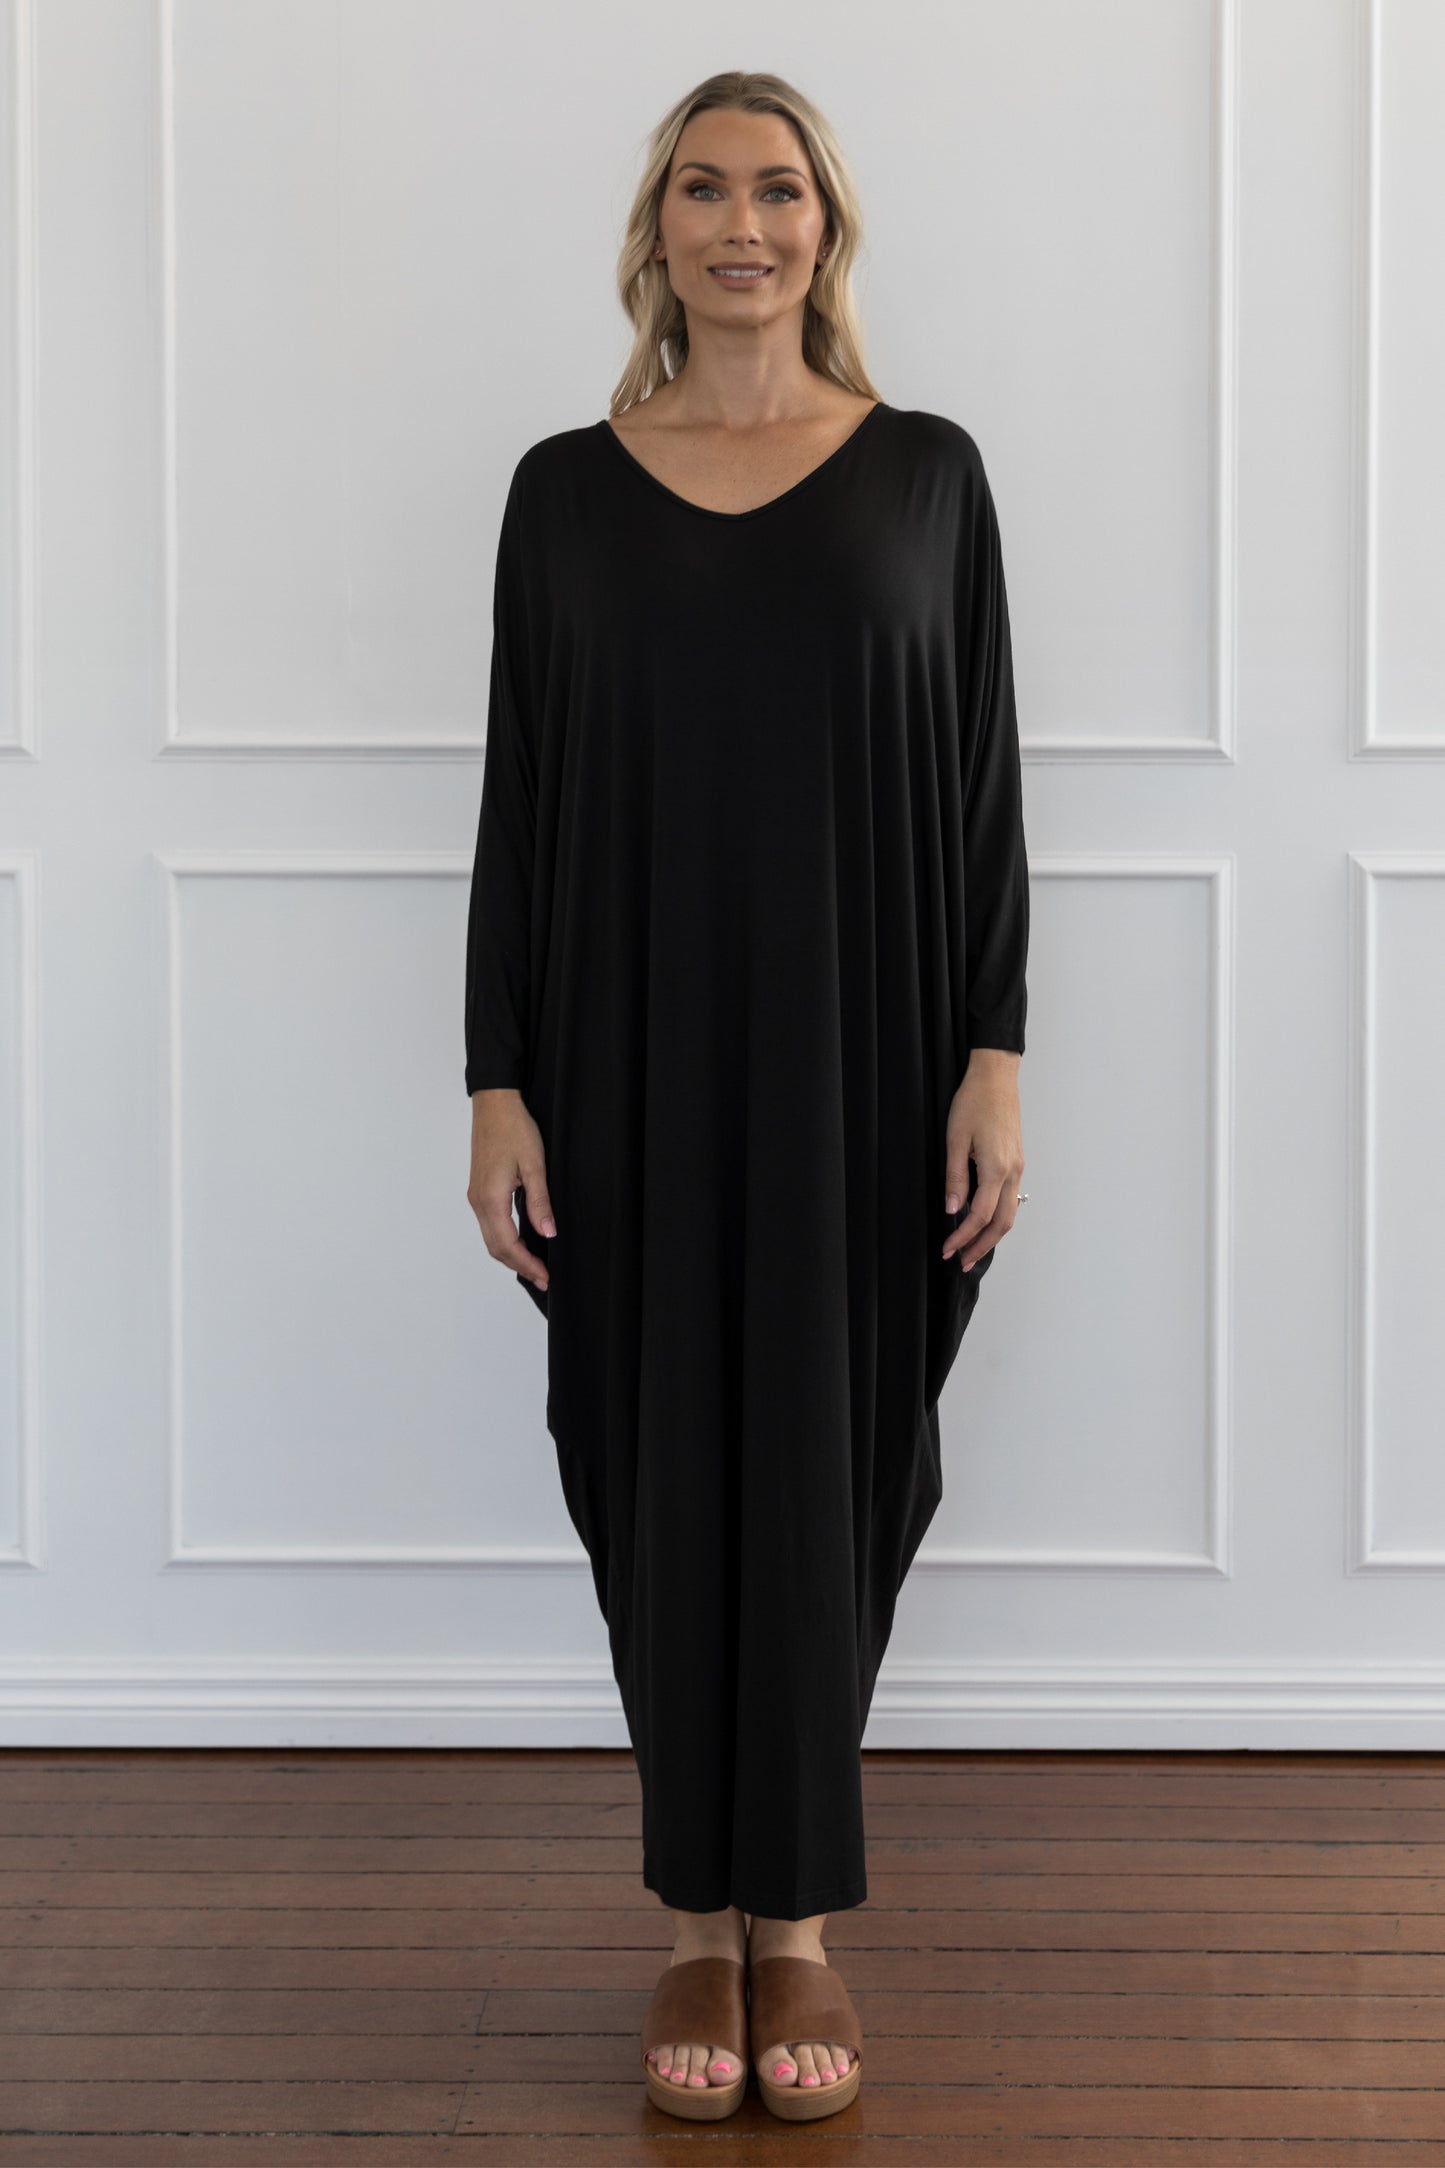 Plus-Sized Black Dress PQ Collection Long Sleeve Maxi Miracle Dress